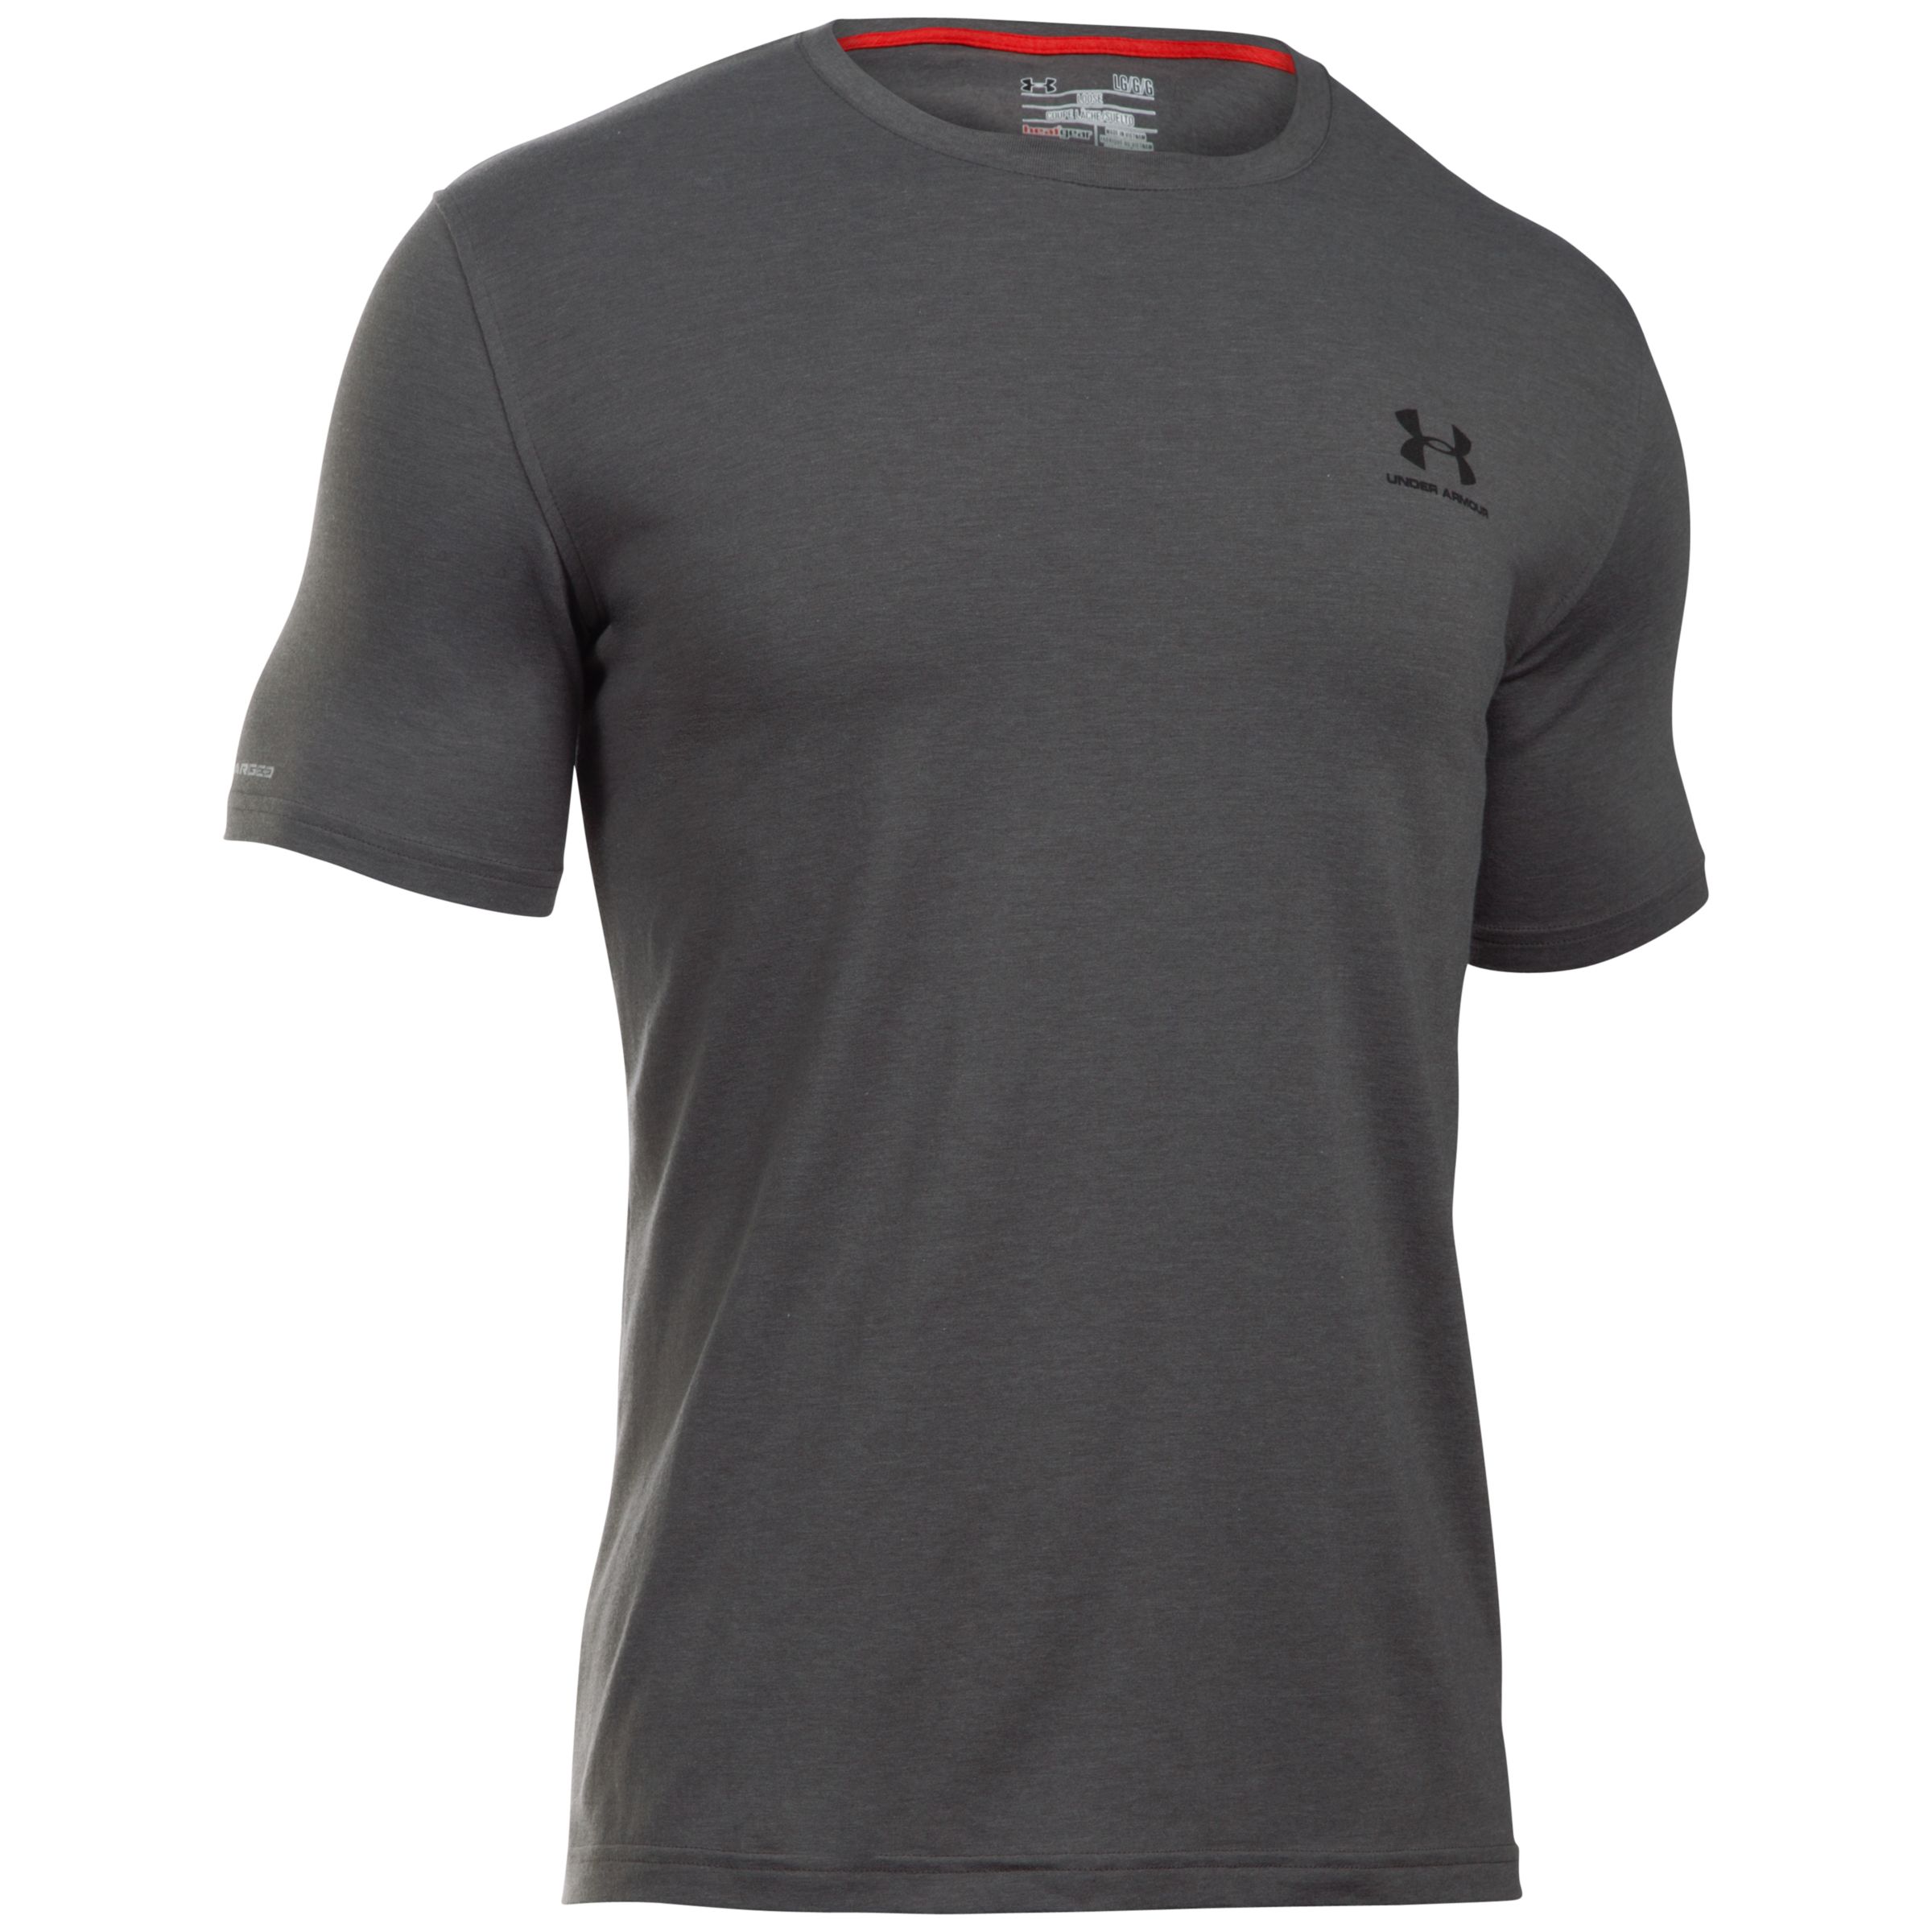 Unmanned Commercial Posterity Under Armour Charged Cotton Sportstyle T-Shirt, Grey